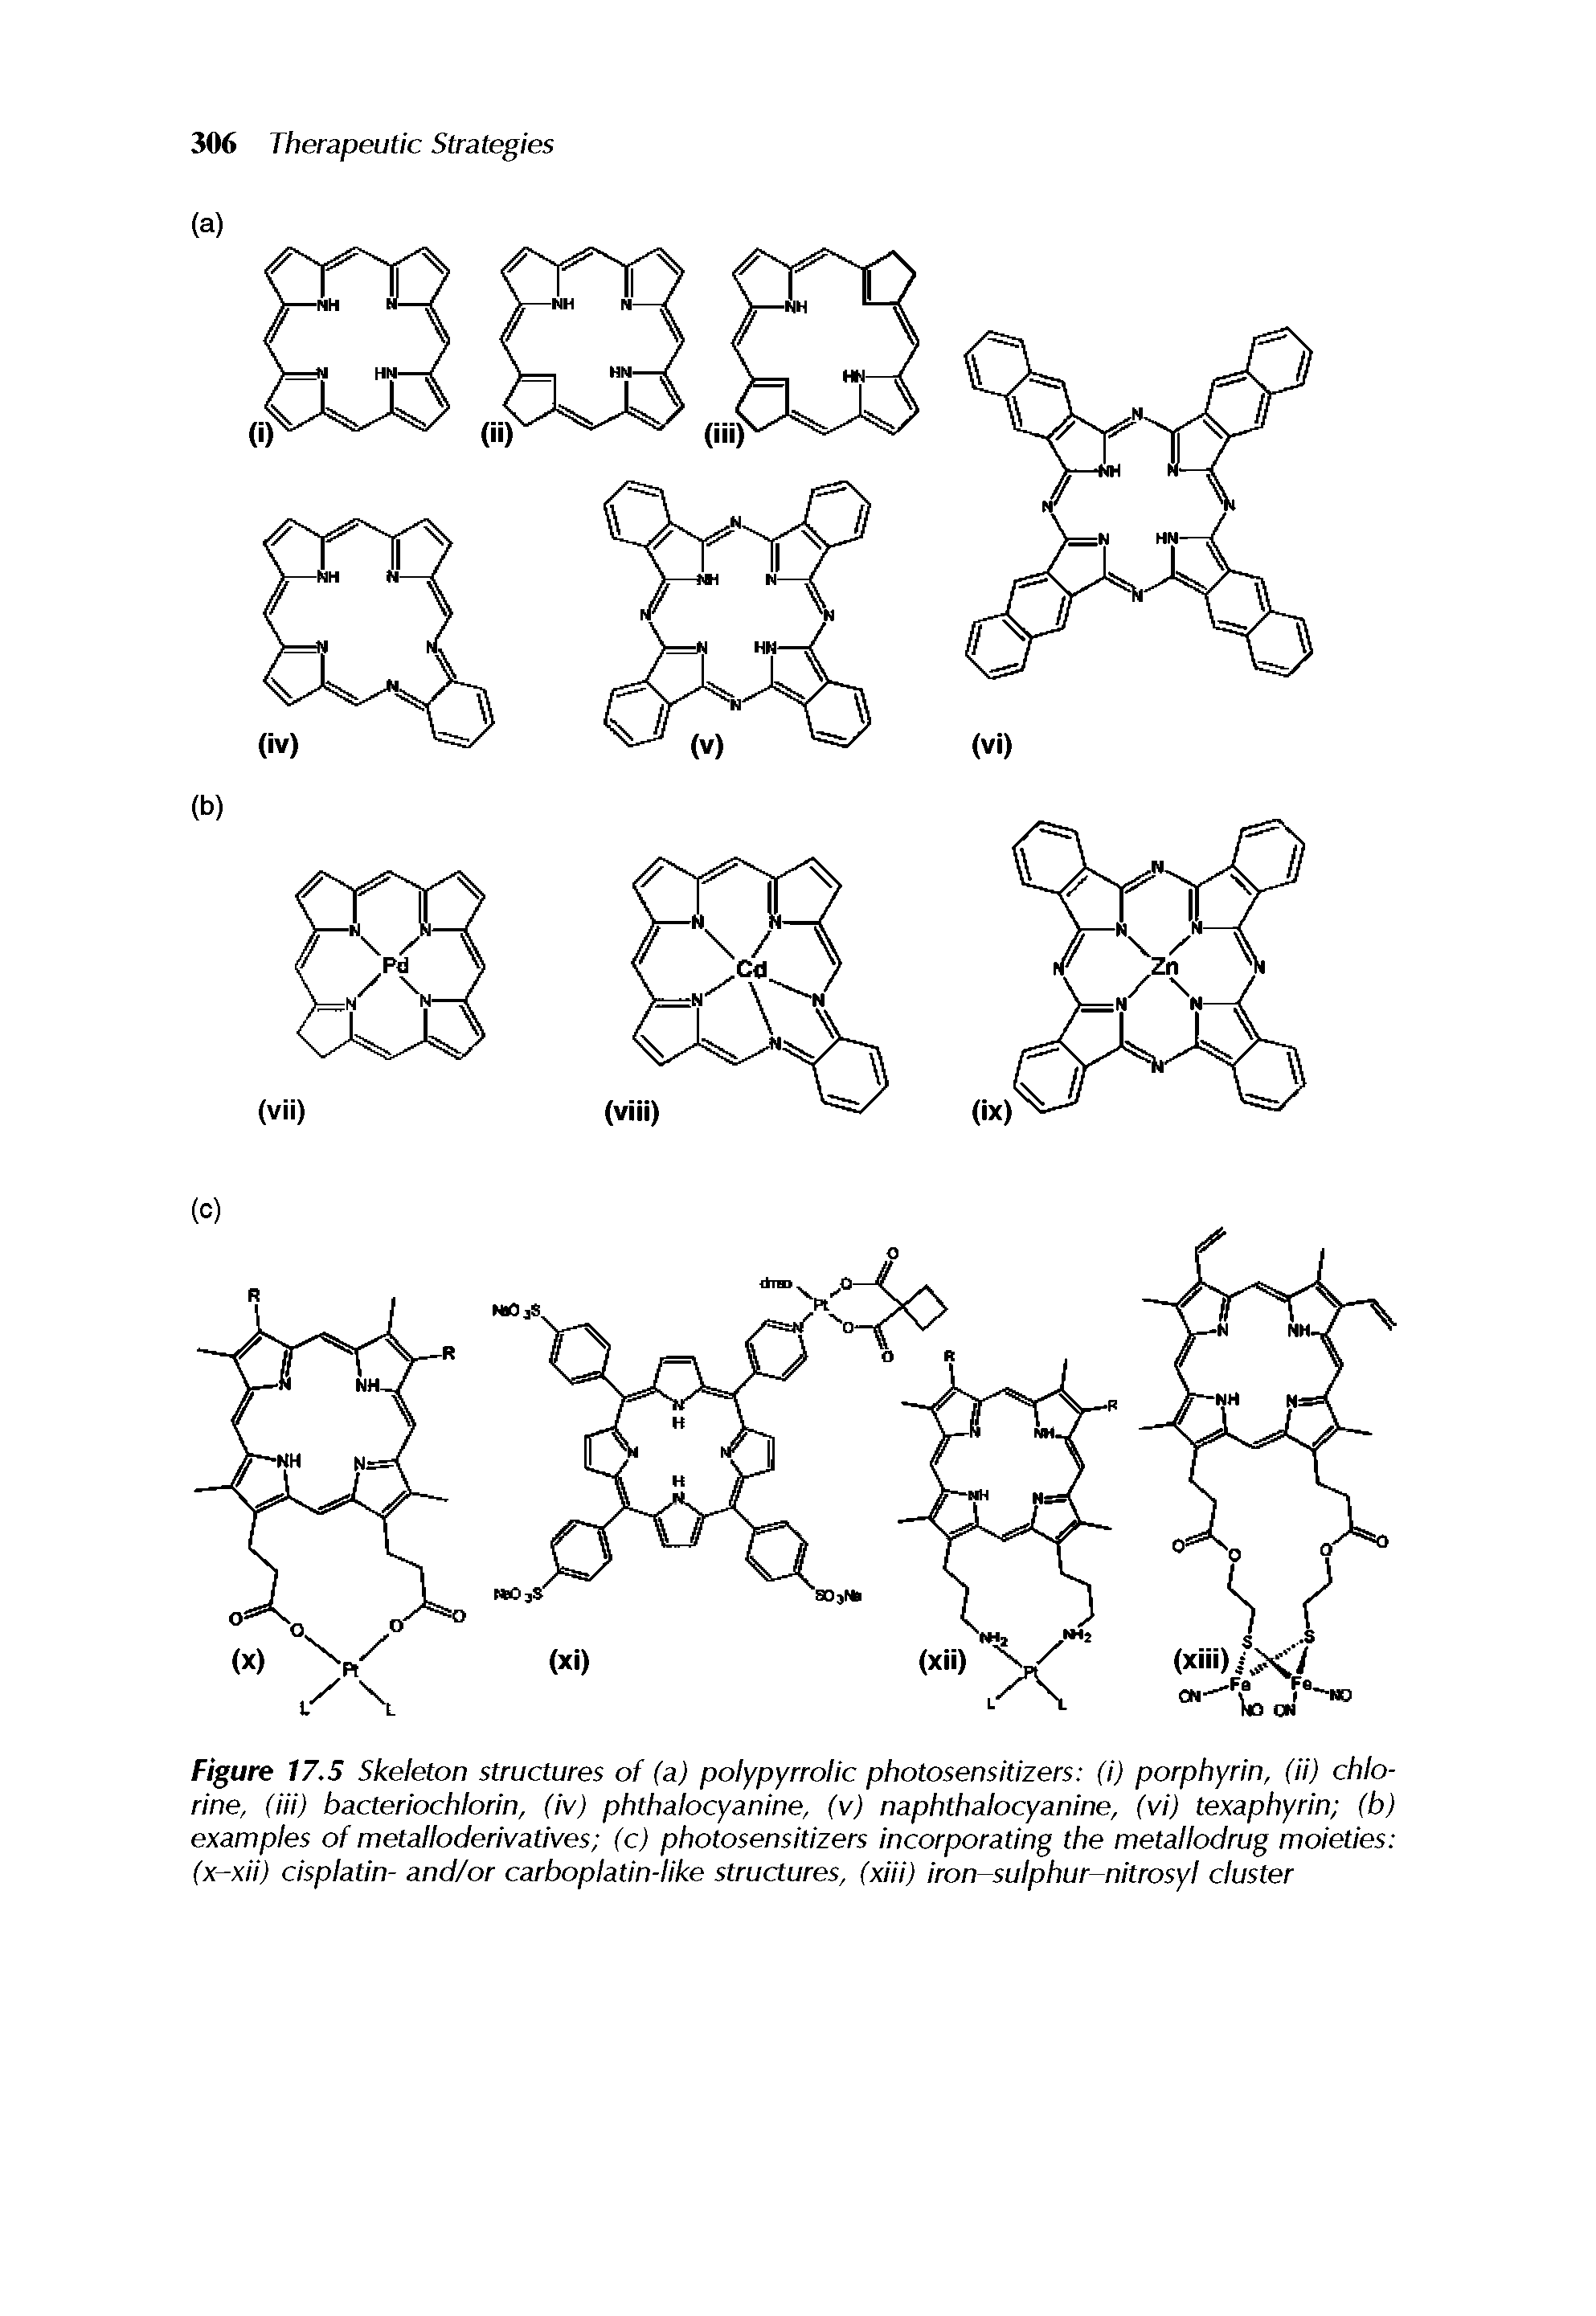 Figure 17.5 Skeleton structures of (a) polypyrrolic photosensitizers (i) porphyrin, (ii) chlorine, (Hi) bacteriochlorin, (iv) phthalocyanine, (v) naphthalocyanine, (vi) texaphyrin (b) examples of metalloderivatives (c) photosensitizers incorporating the metallodrug moieties (x-xii) cisplatin- and/or carboplatin-like structures, (xiii) iron sulphur nilrosy cluster...